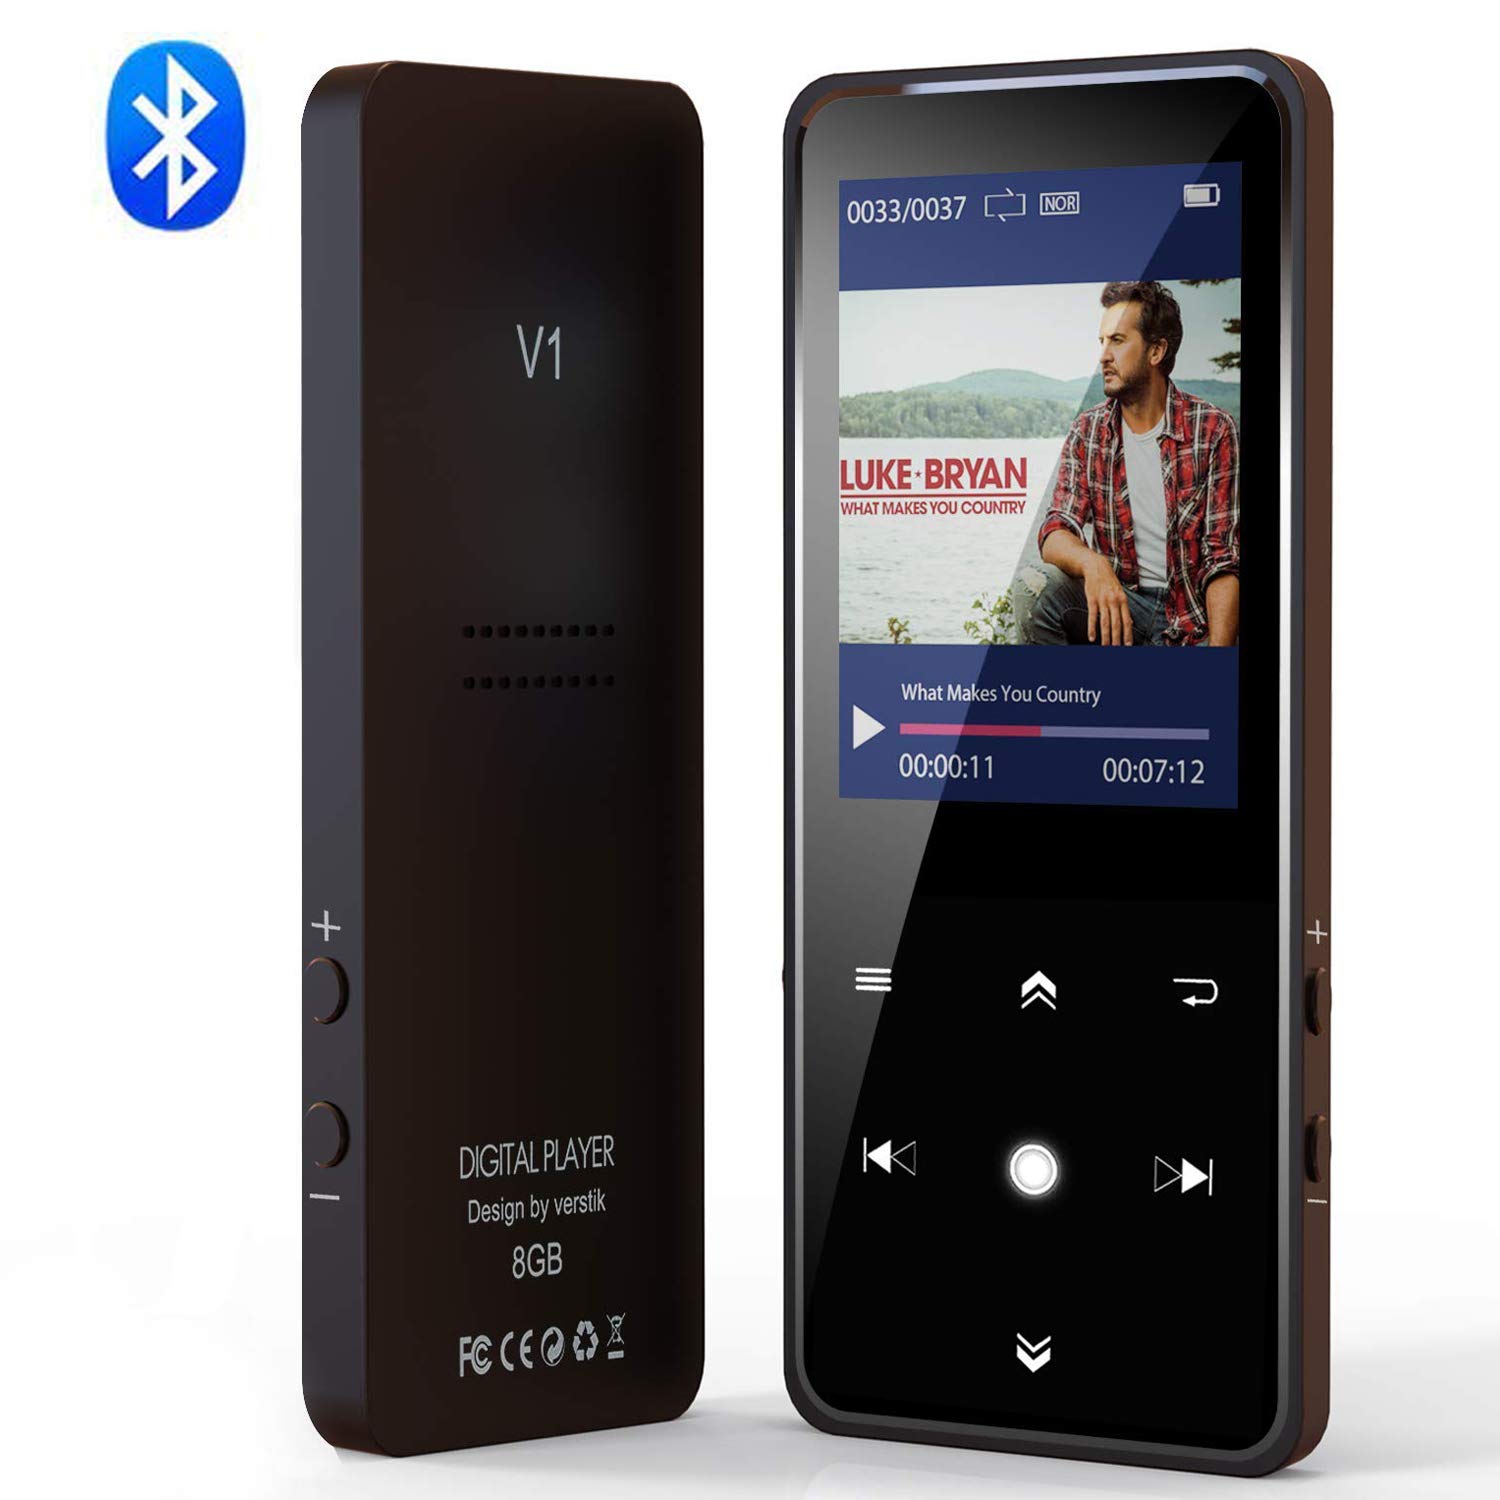 Reproductor MP3 Bluetooth solo 9,7€